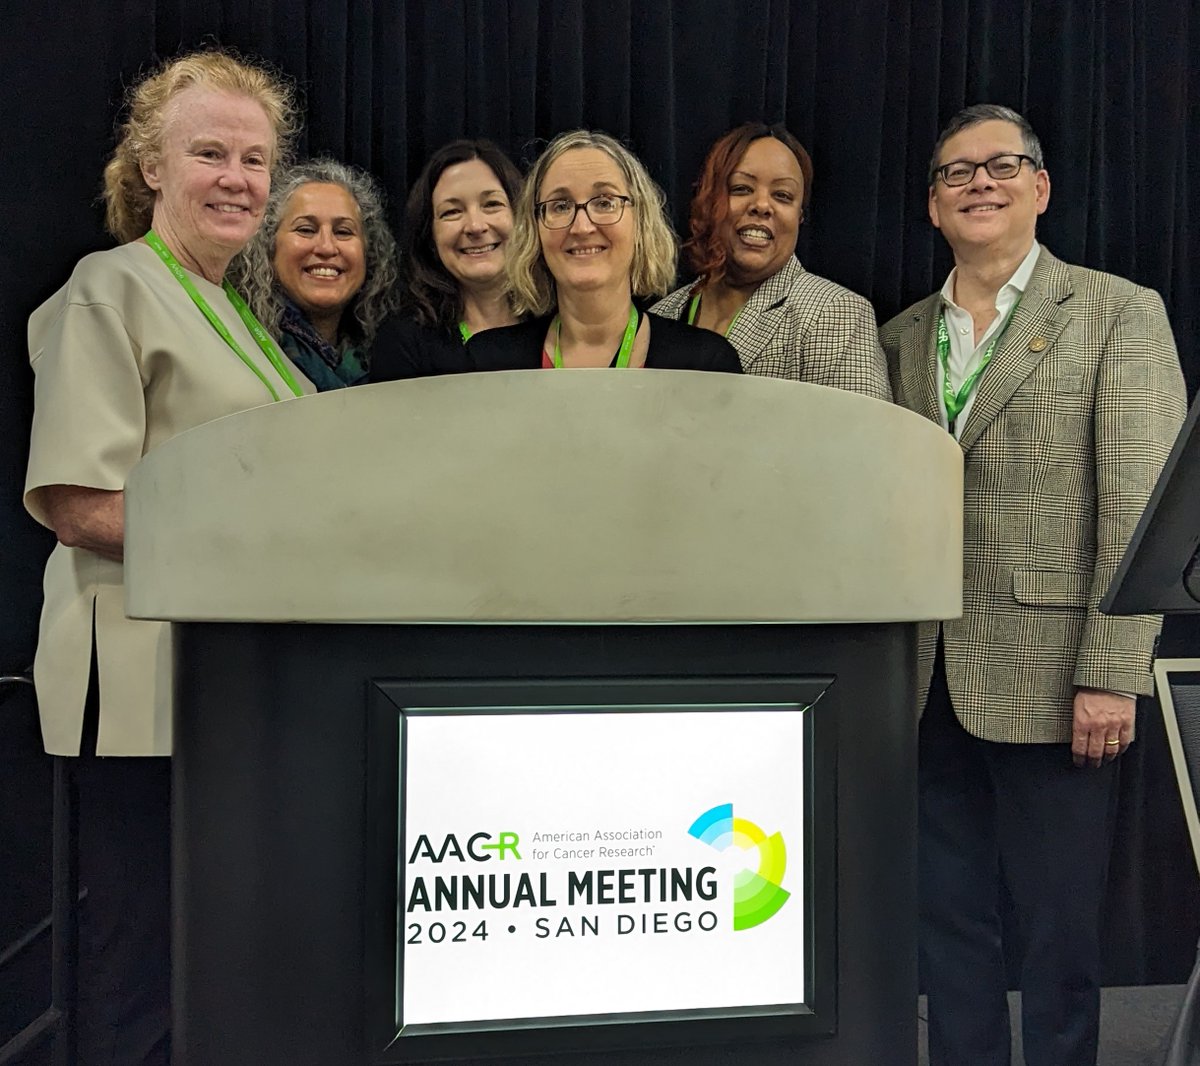 Great to be at #AACR24 where #PECGS investigators discussed how community liaisons implemented culturally tailored programs to improve cancer genetic education & increase participation in genetic counseling, risk assessment, & genetic research via @theNCI funded projects.